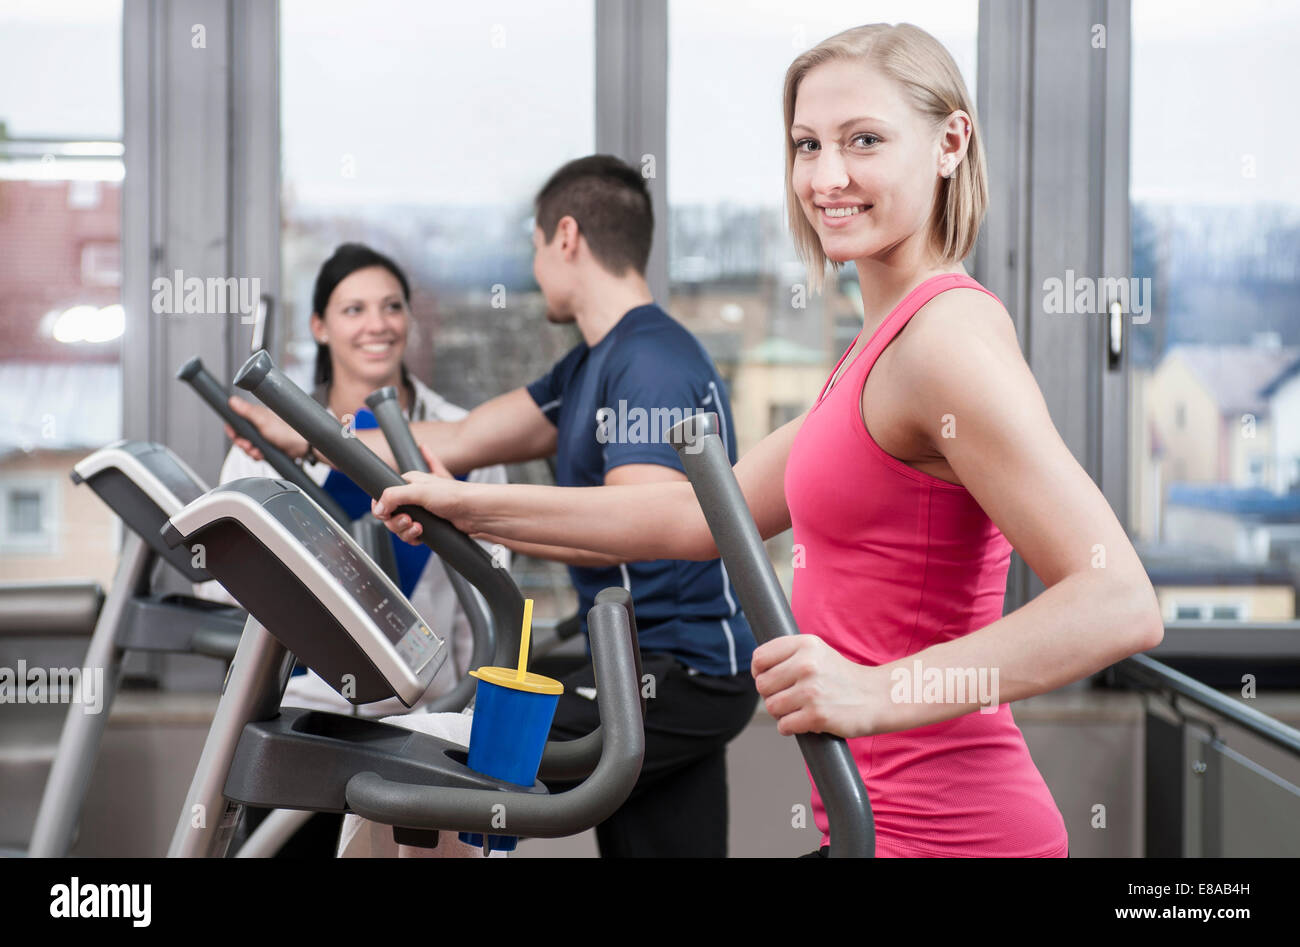 Young woman on elliptical trainer in gym Stock Photo - Alamy